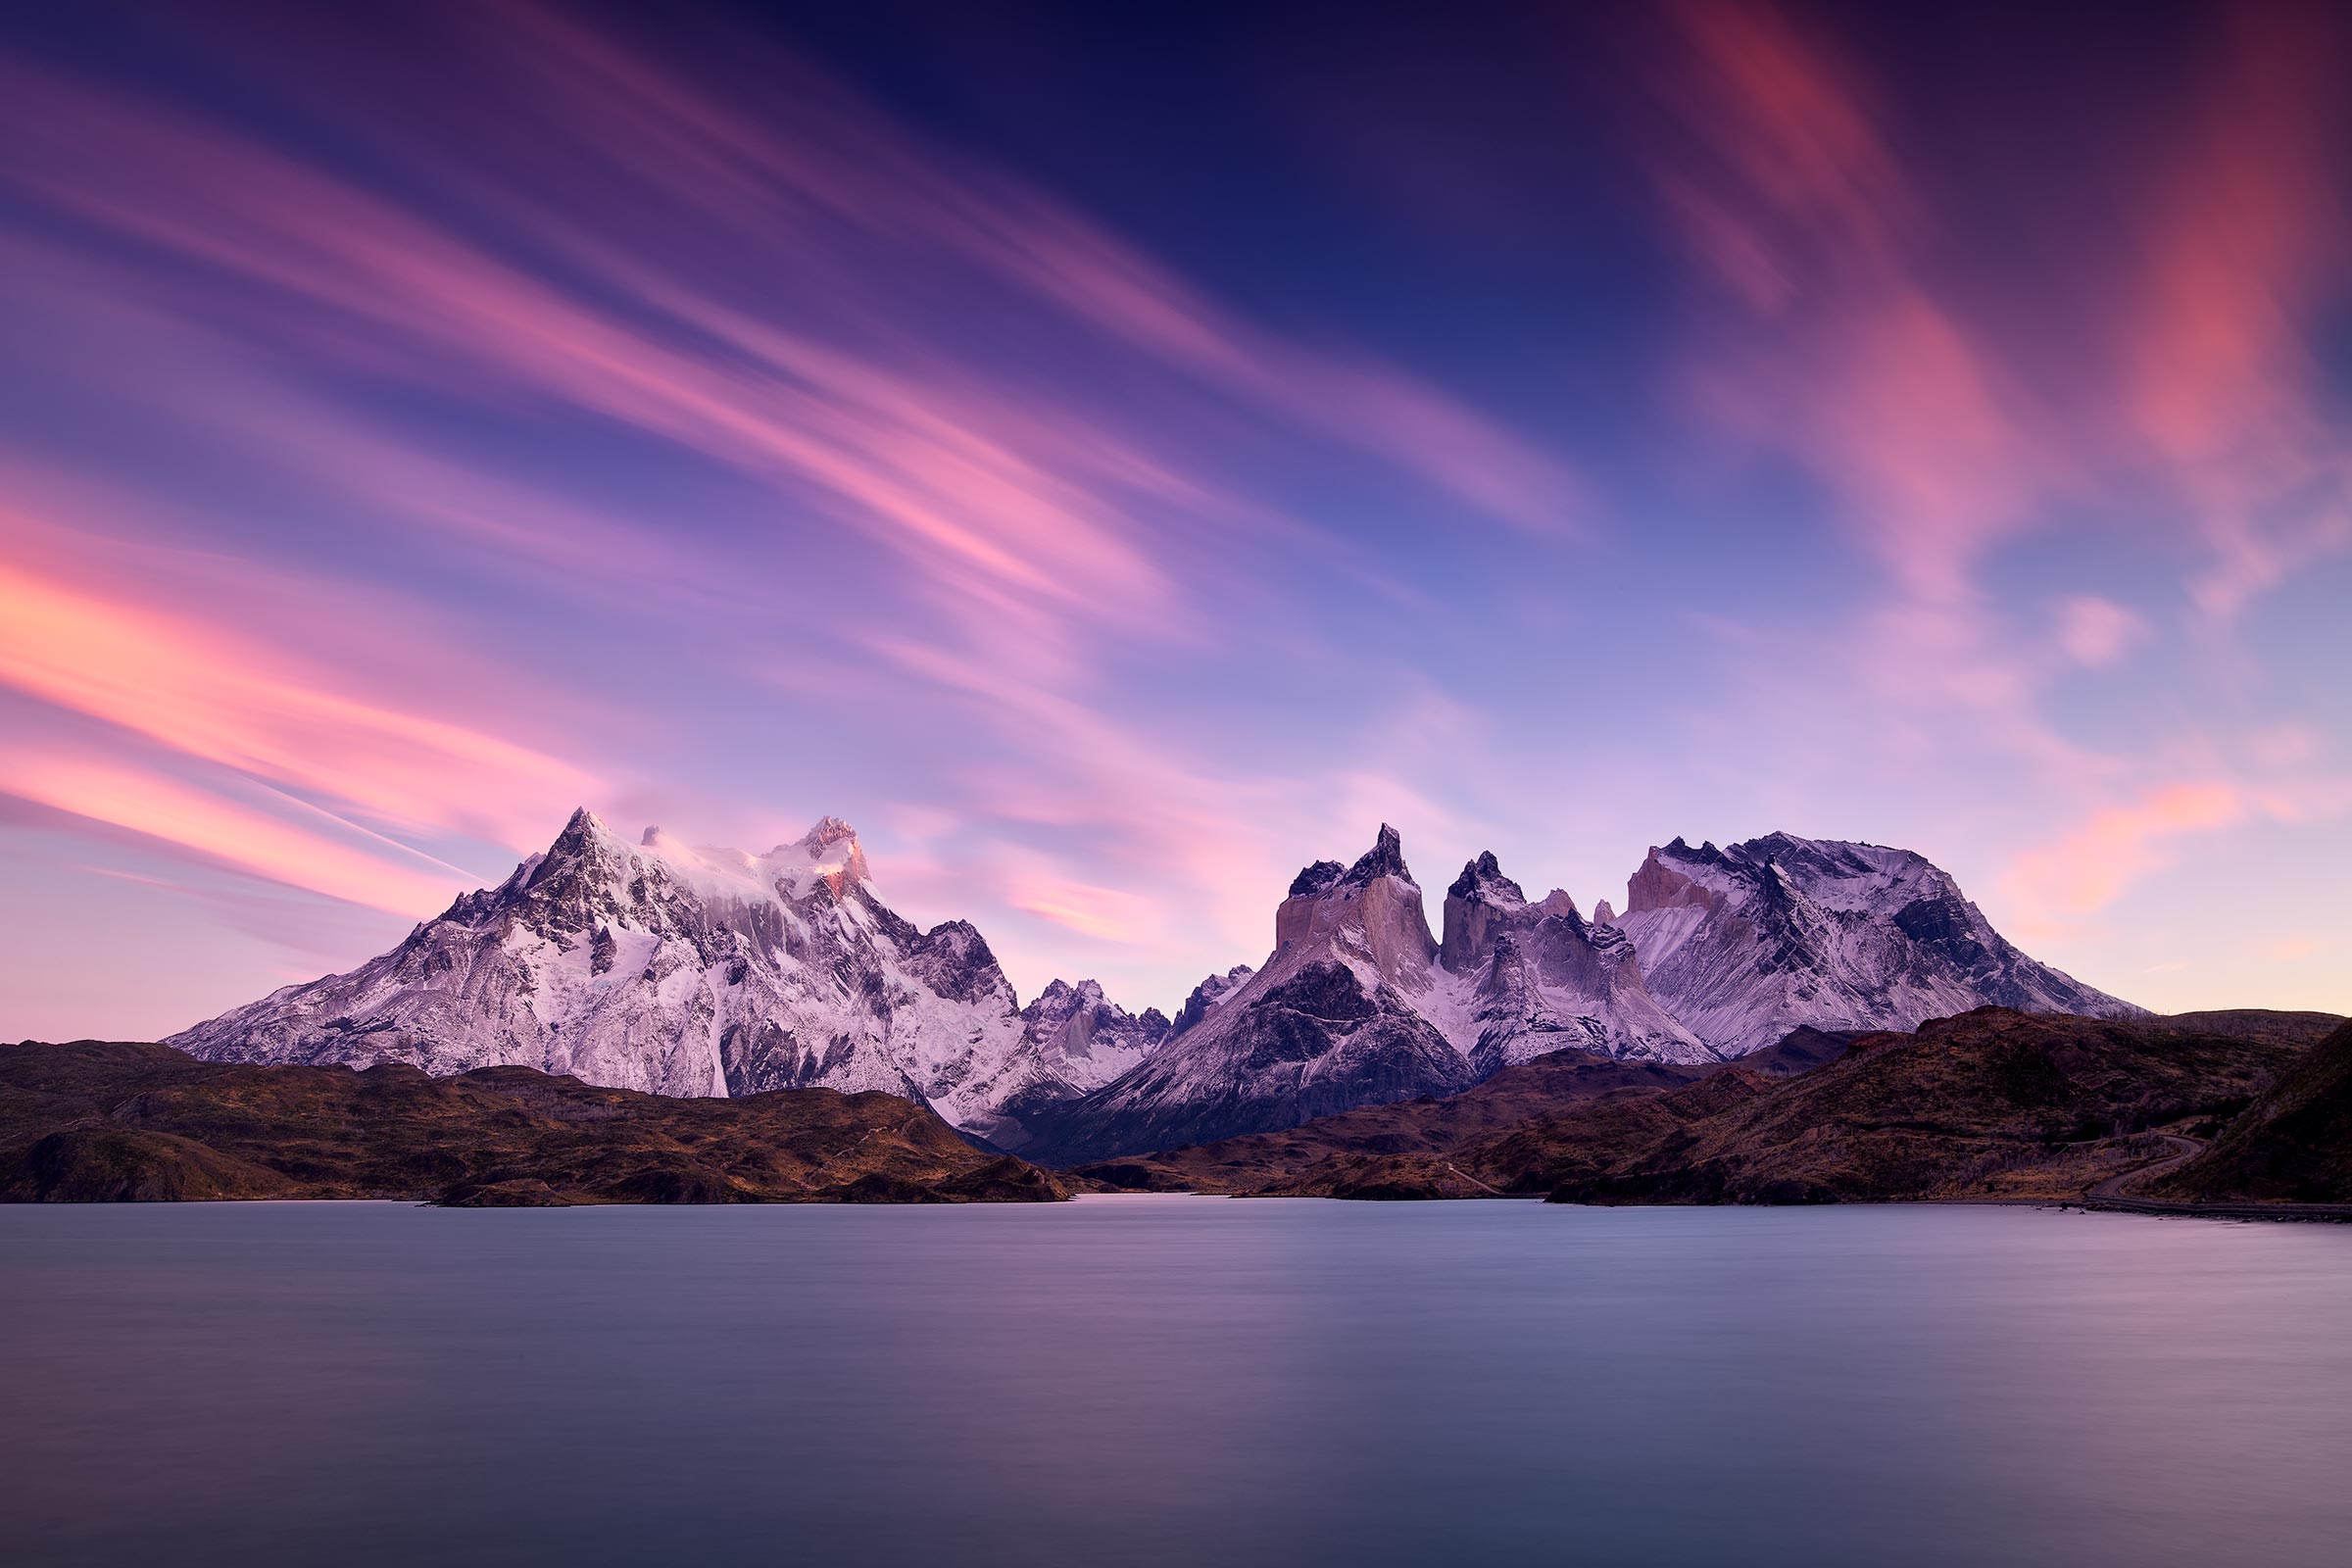 patagonia photography workshops | Paul Reiffer - Photographer